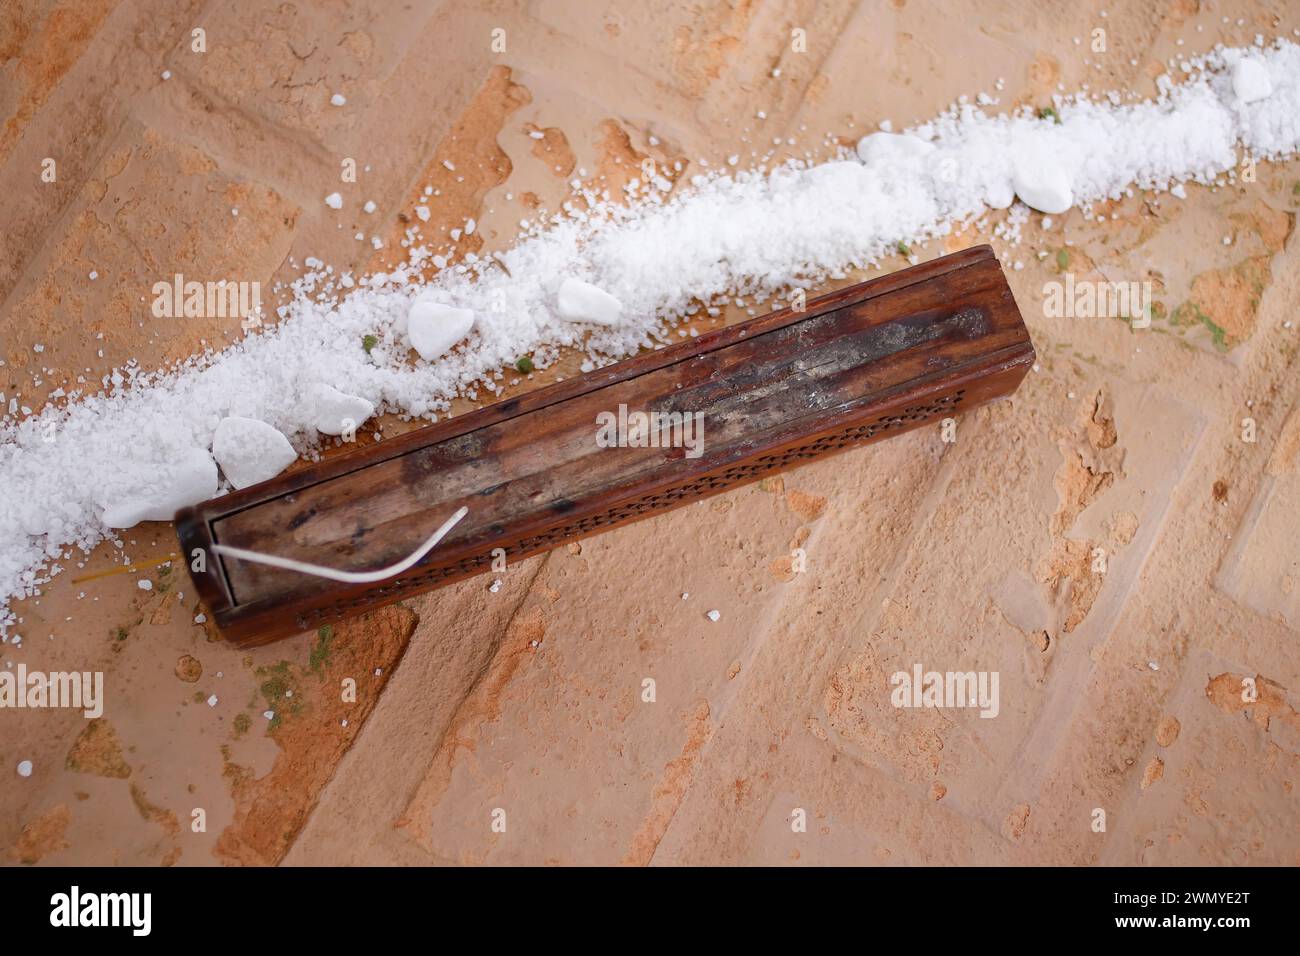 detail of wooden incense holder in the shape of a chest and grain of coarse white salt on the ceremonial floor Stock Photo